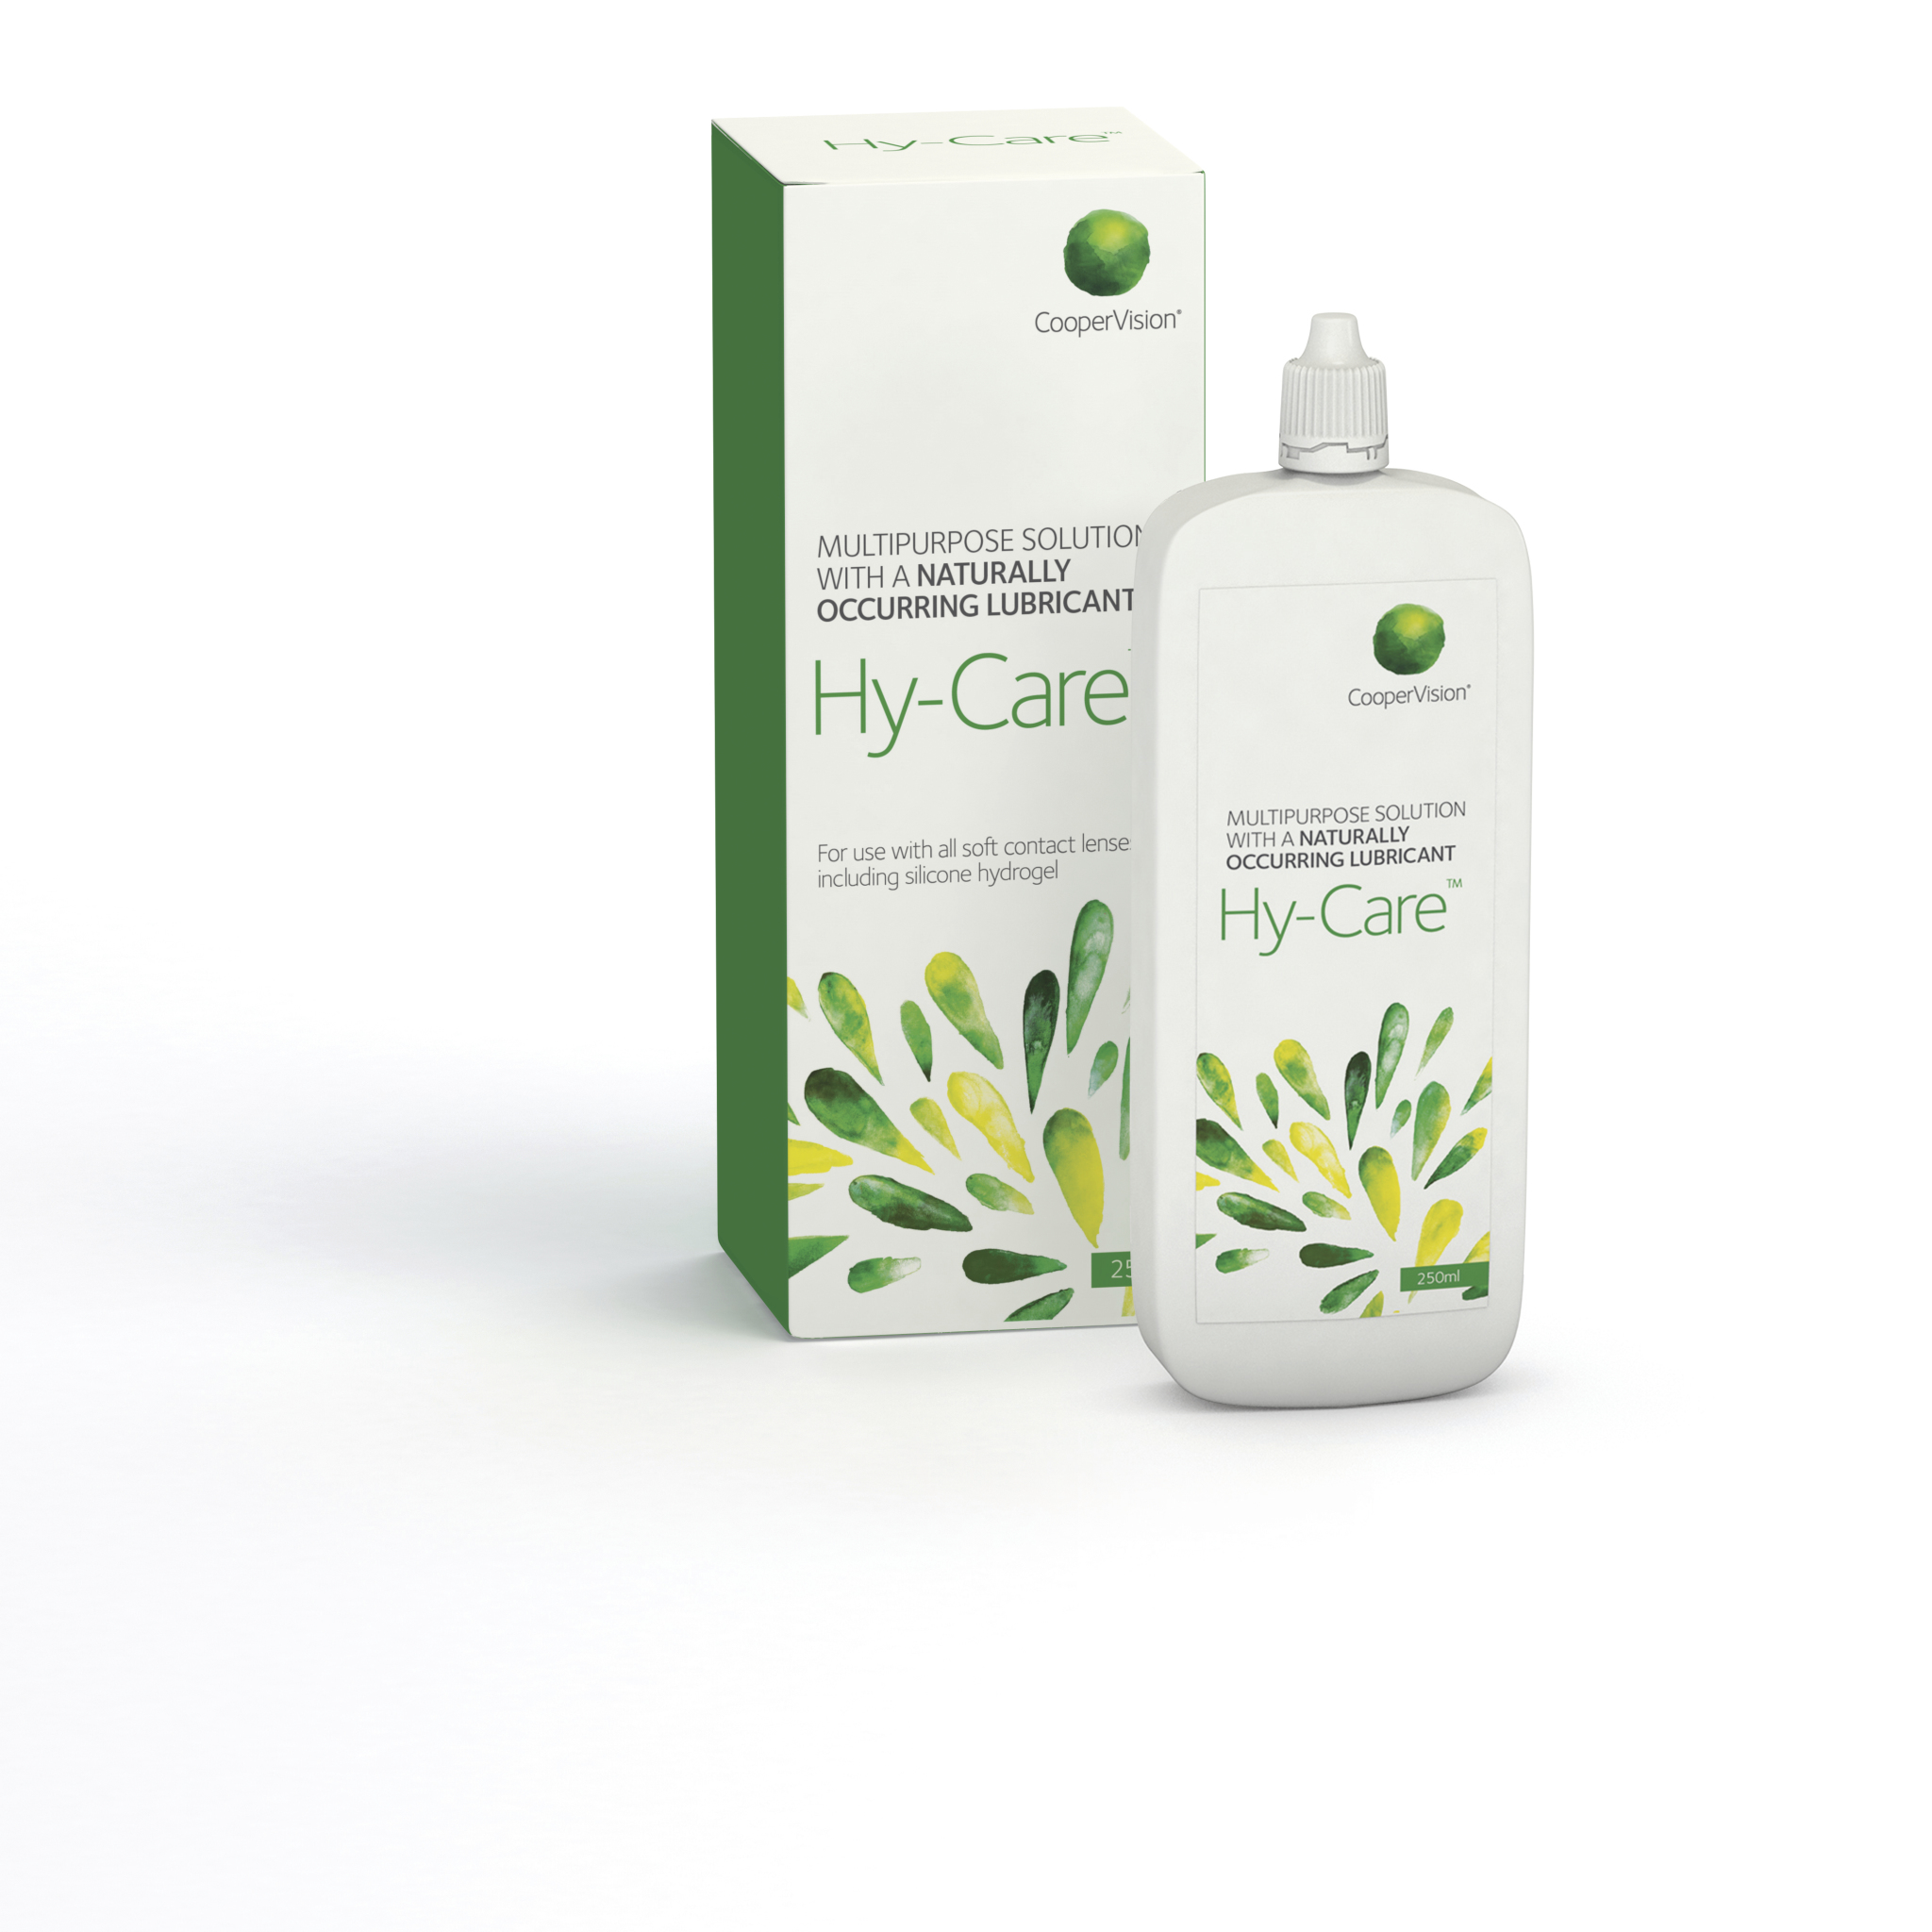 Hy-Care Product Image